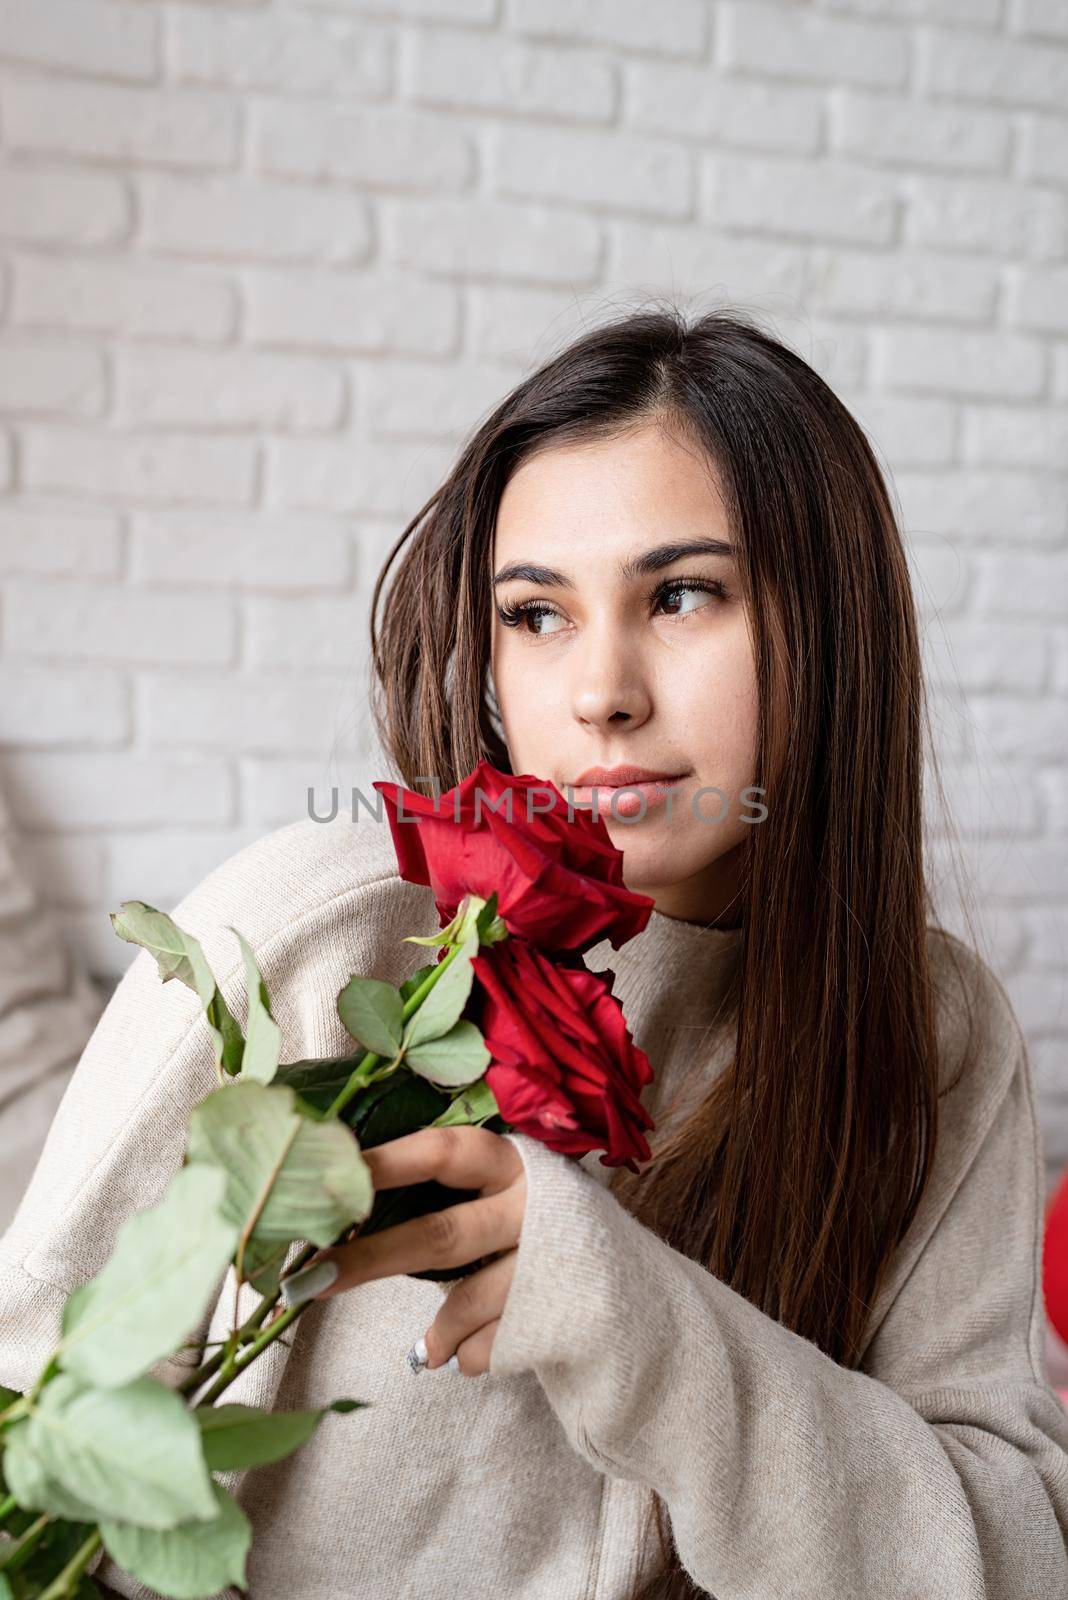 Young beautiful woman sitting in the bed celebrating valentine day holding red roses by Desperada